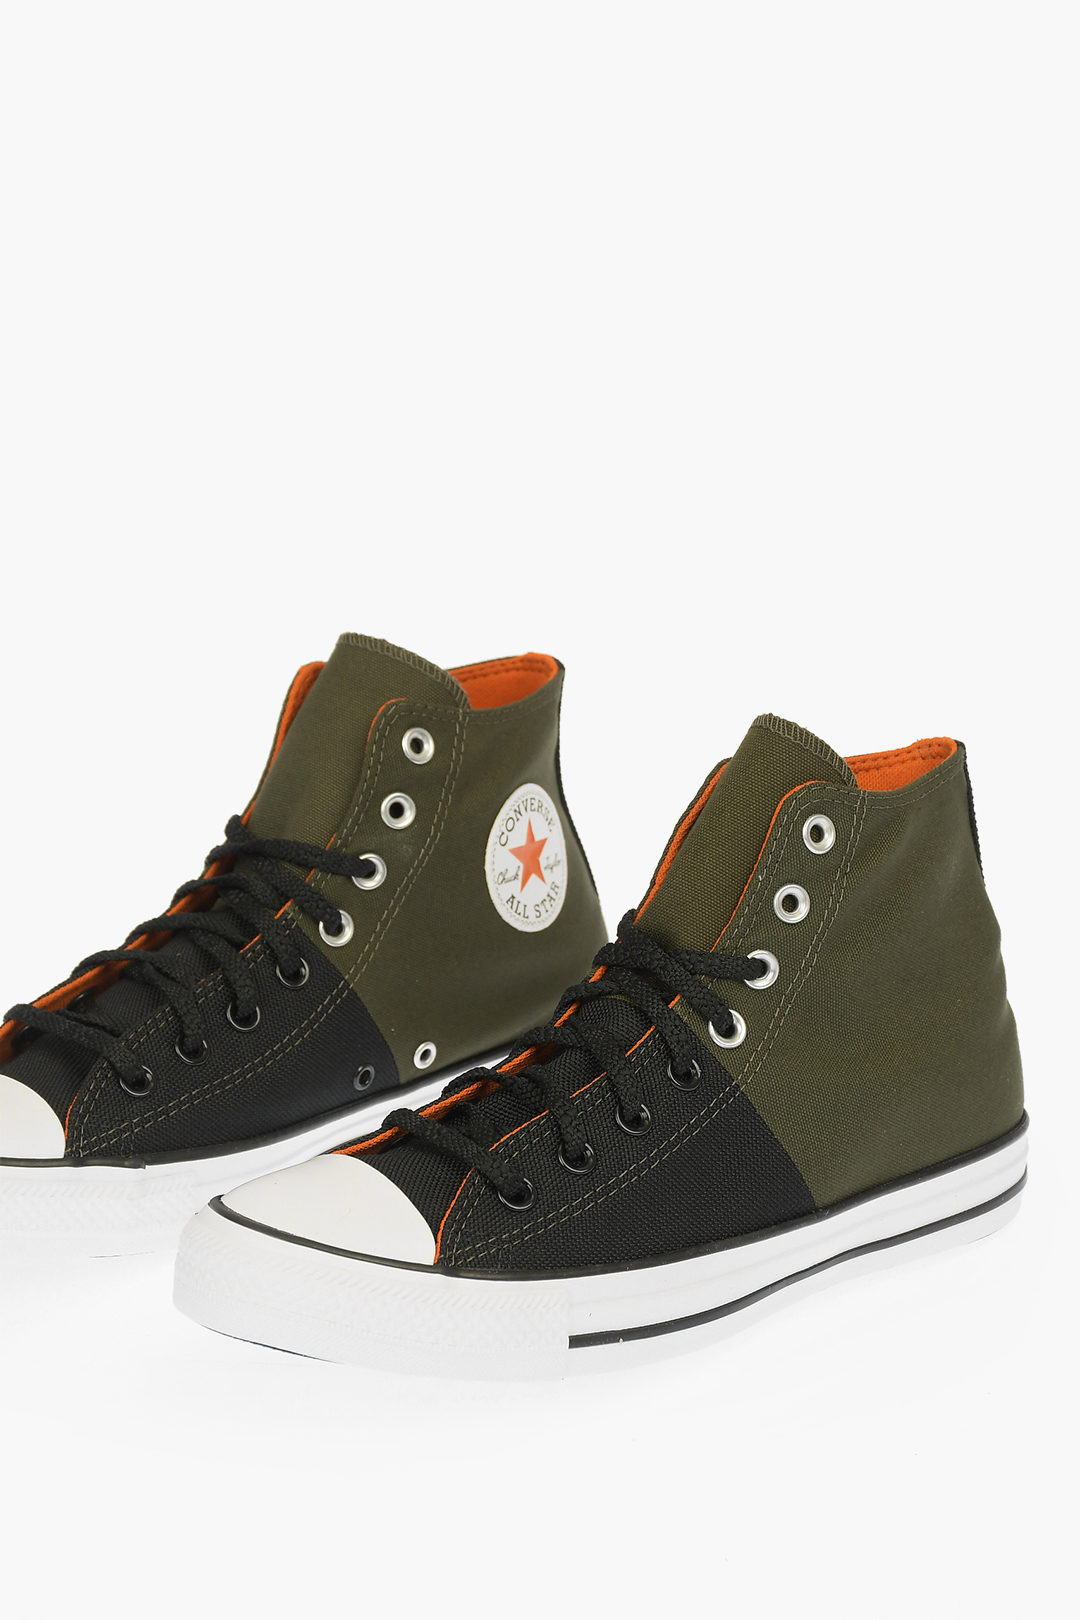 Privileged smog construction Converse ALL STAR Fabric Sneakers men - Glamood Outlet